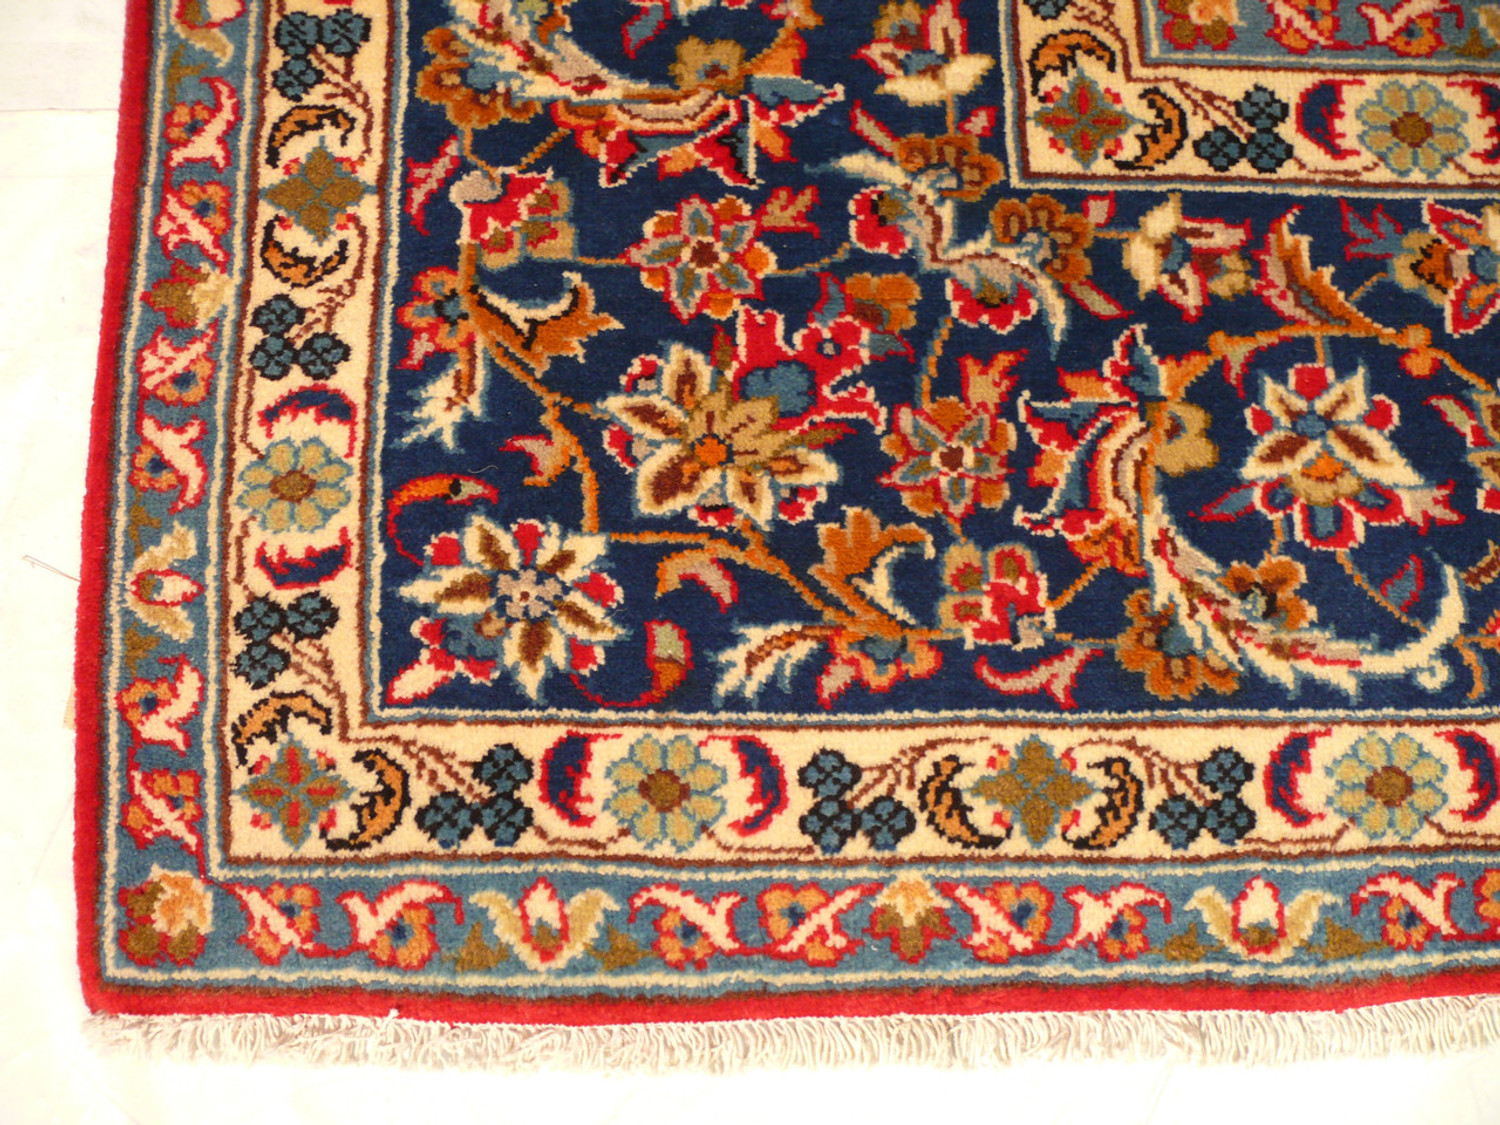 Enhanced close-up of the Persian Isfahan rug's decorative border with a deep focus on the precision of the small floral and vine elements, set against a dark blue background.